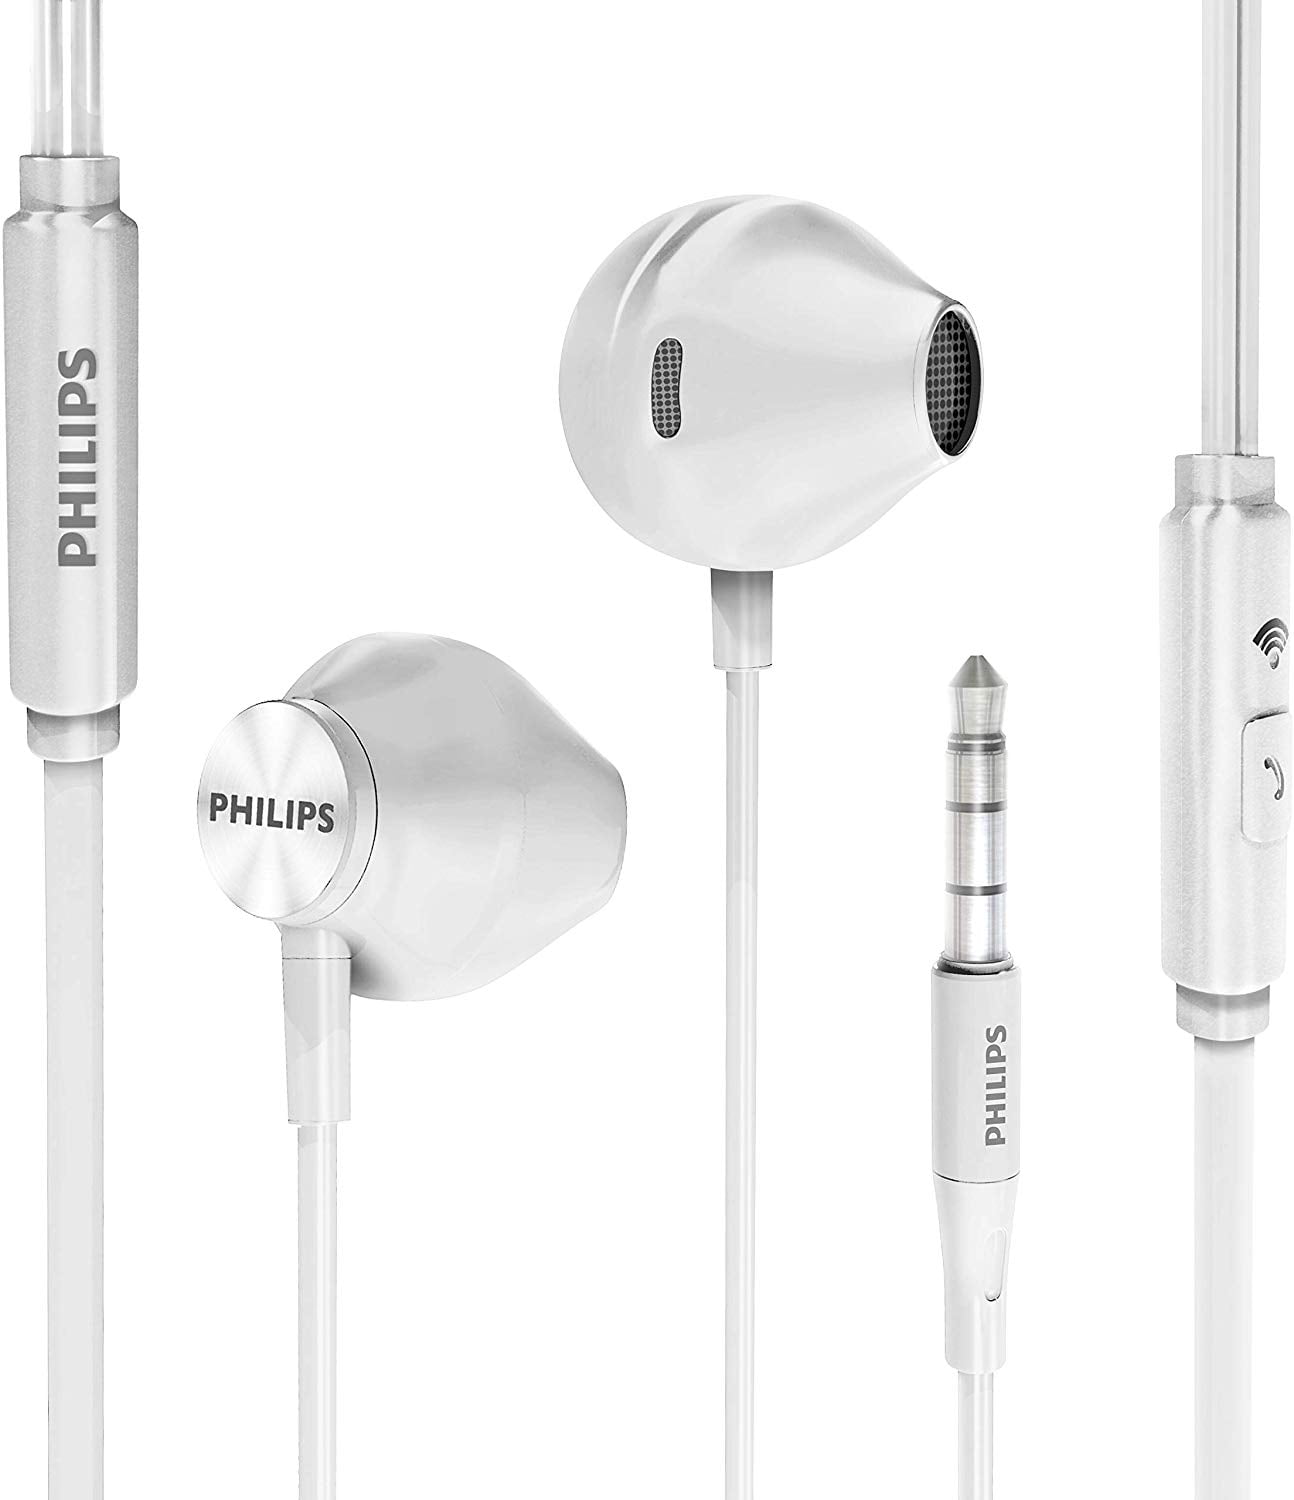 Hi-Res Audio Comfort Fit Headphones with Mic Powerful Bass Lightweight PHILIPS Pro Wired Earbuds 